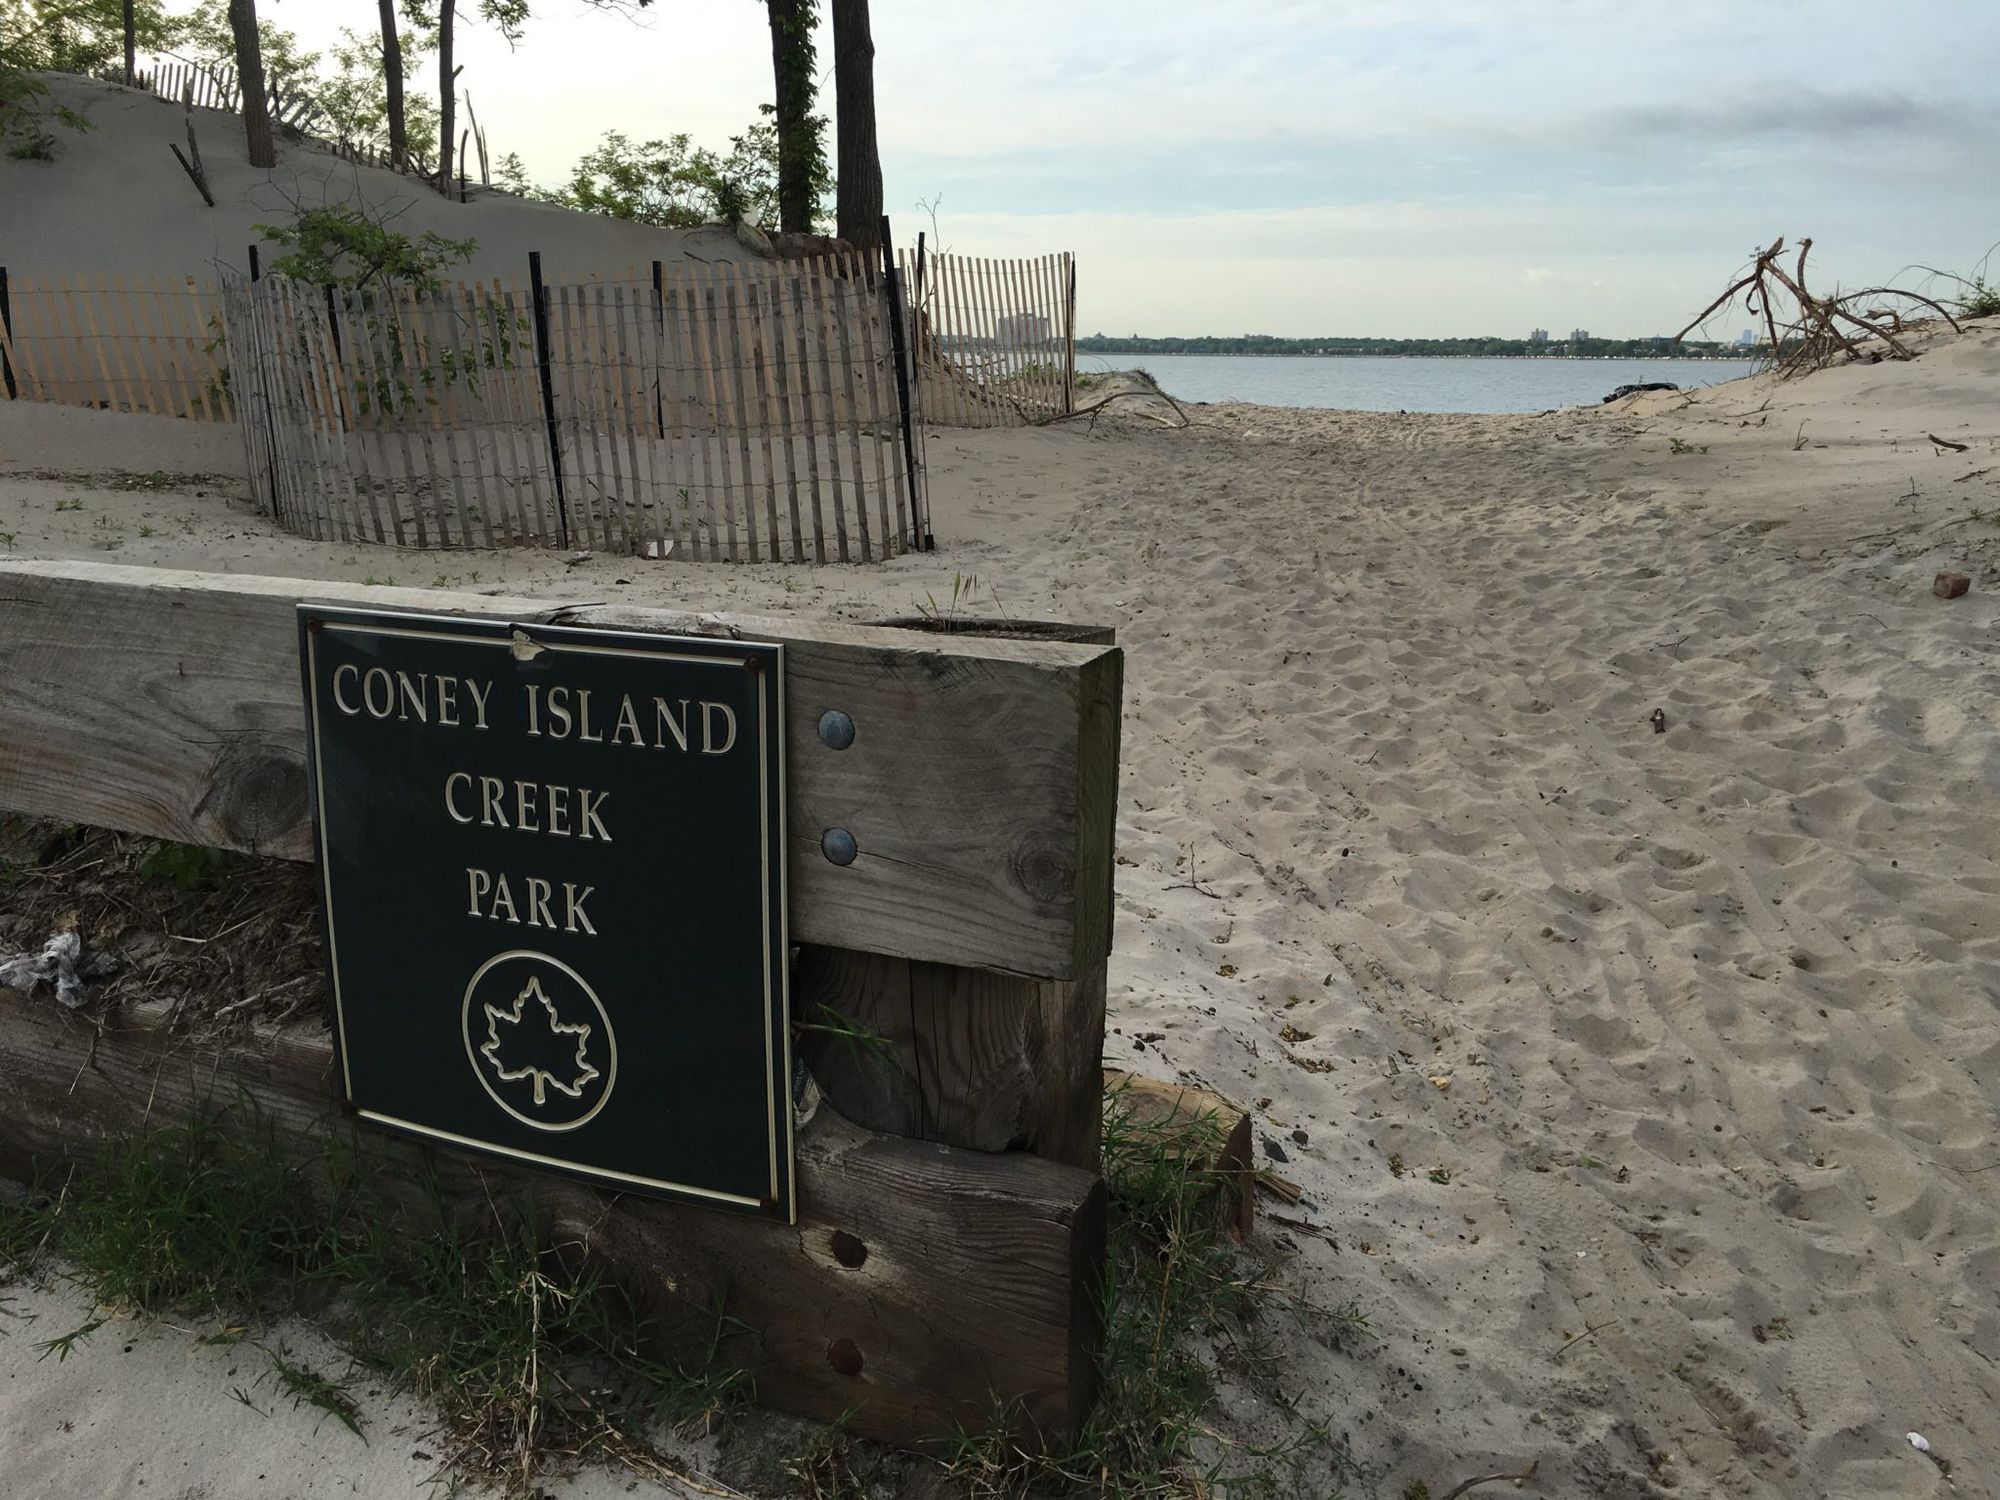 Another Smelly Summer? Sewage Bacteria Swarms Coney Island Creek, Again